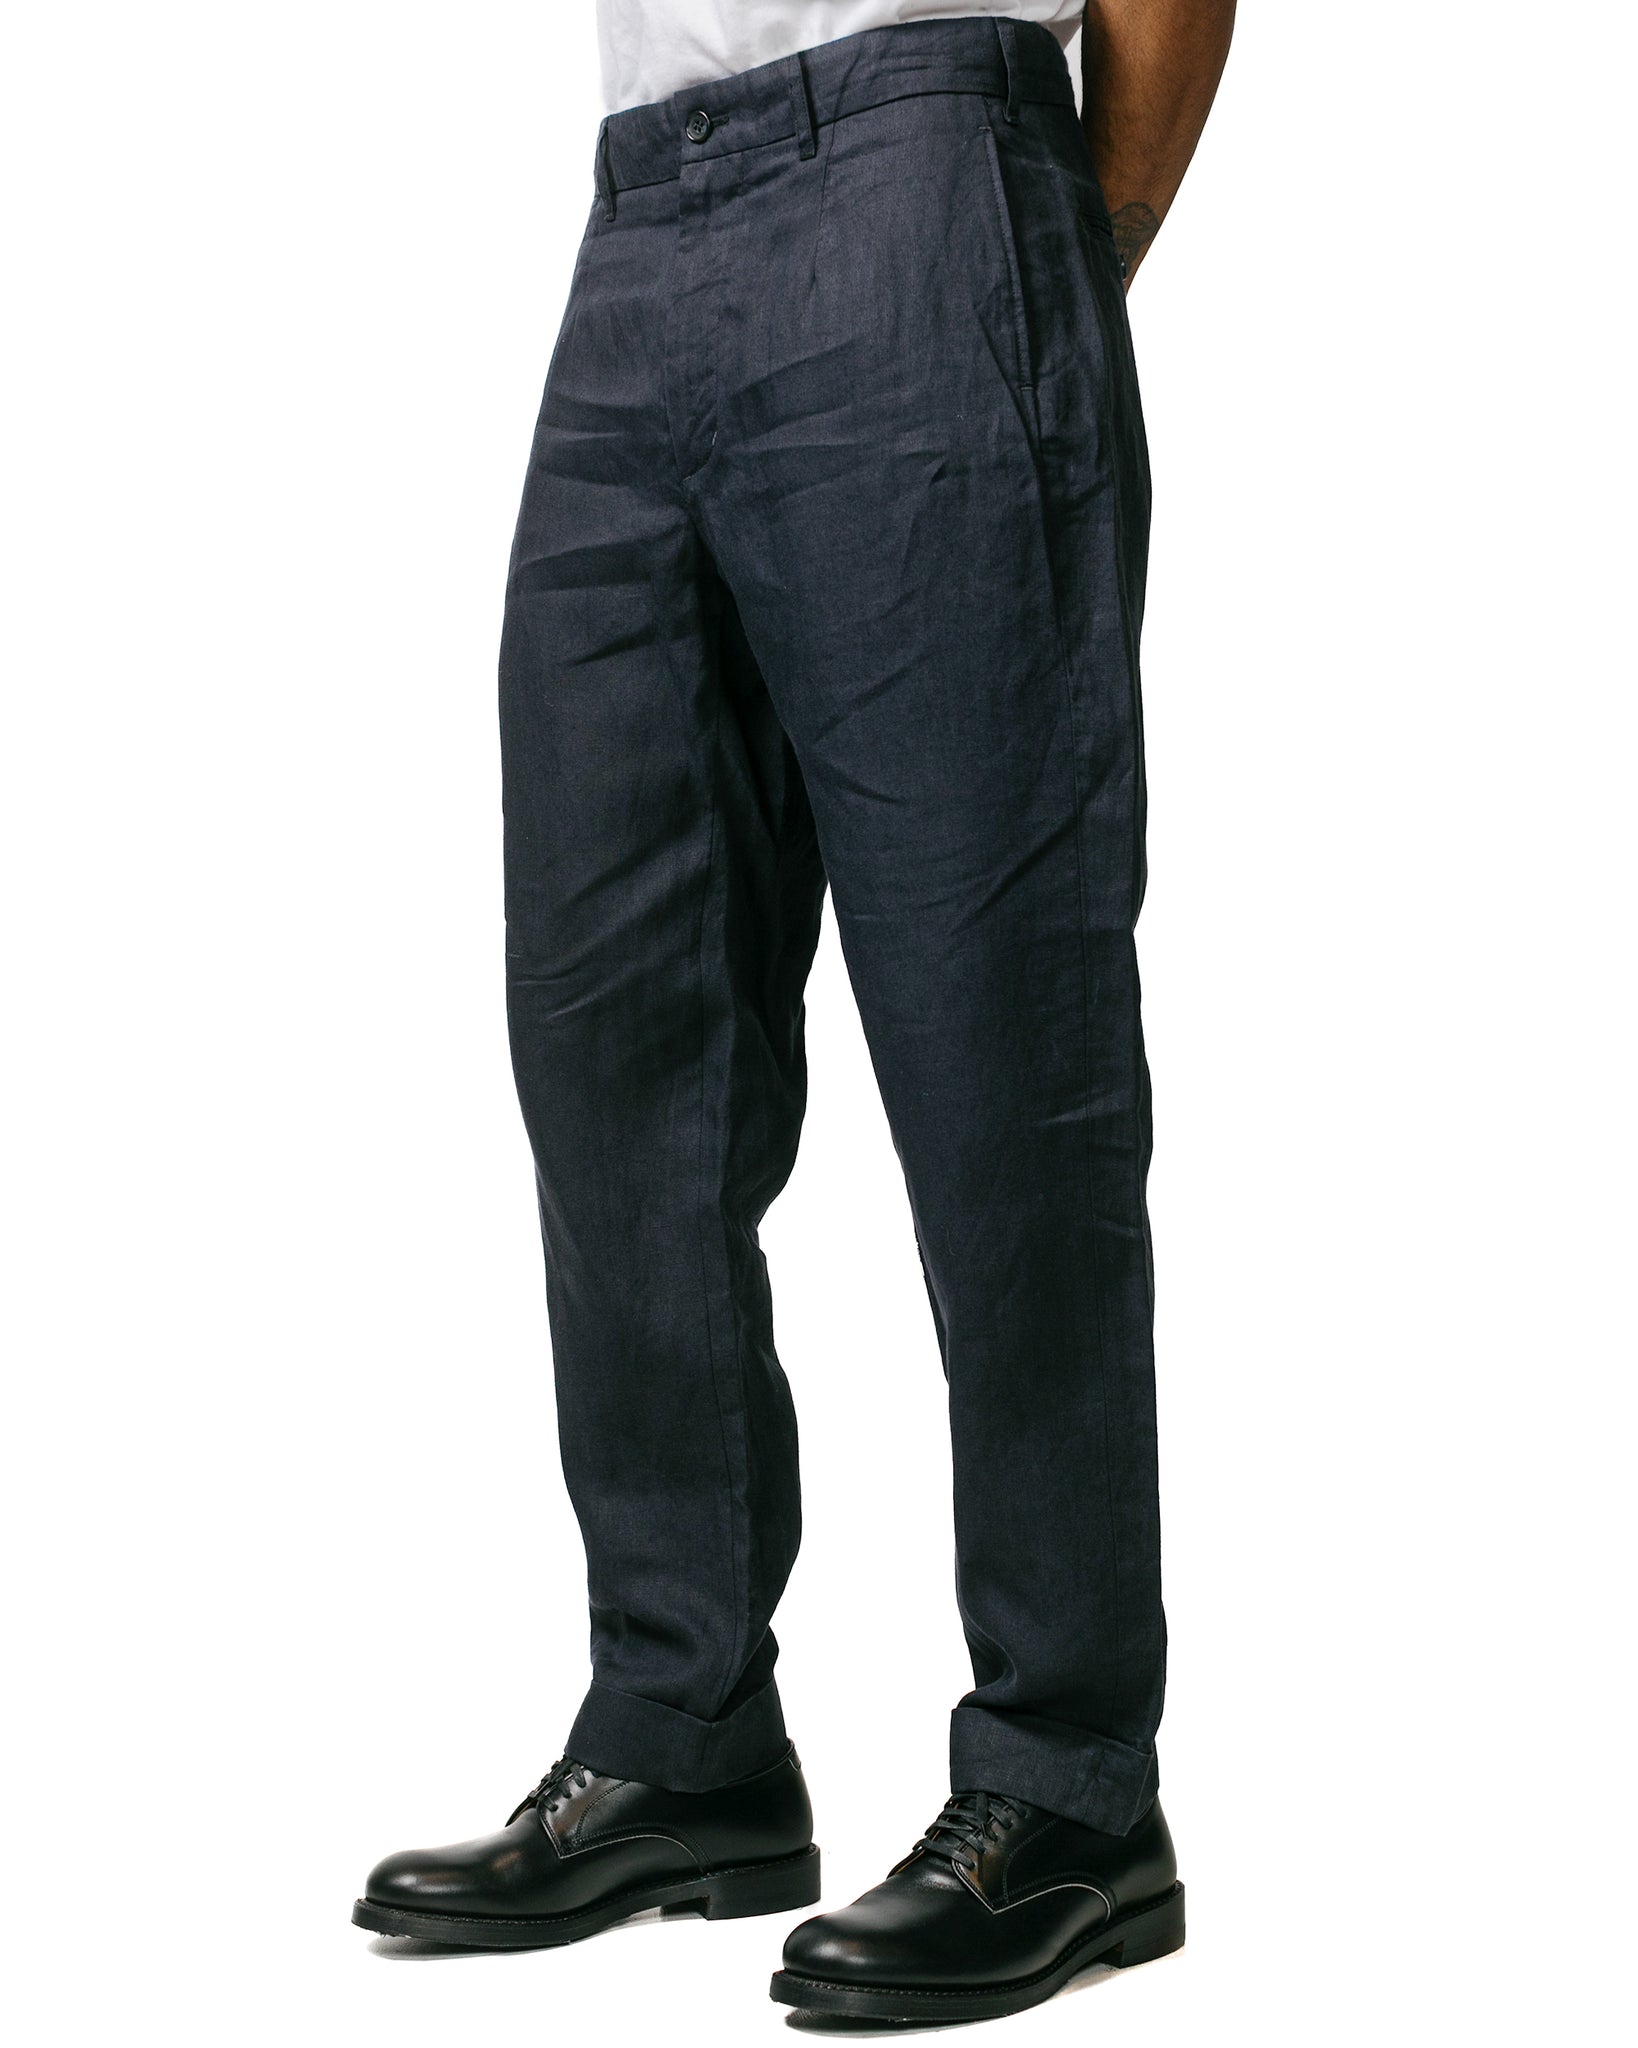 Engineered Garments Andover Pant Navy Linen Twill model front